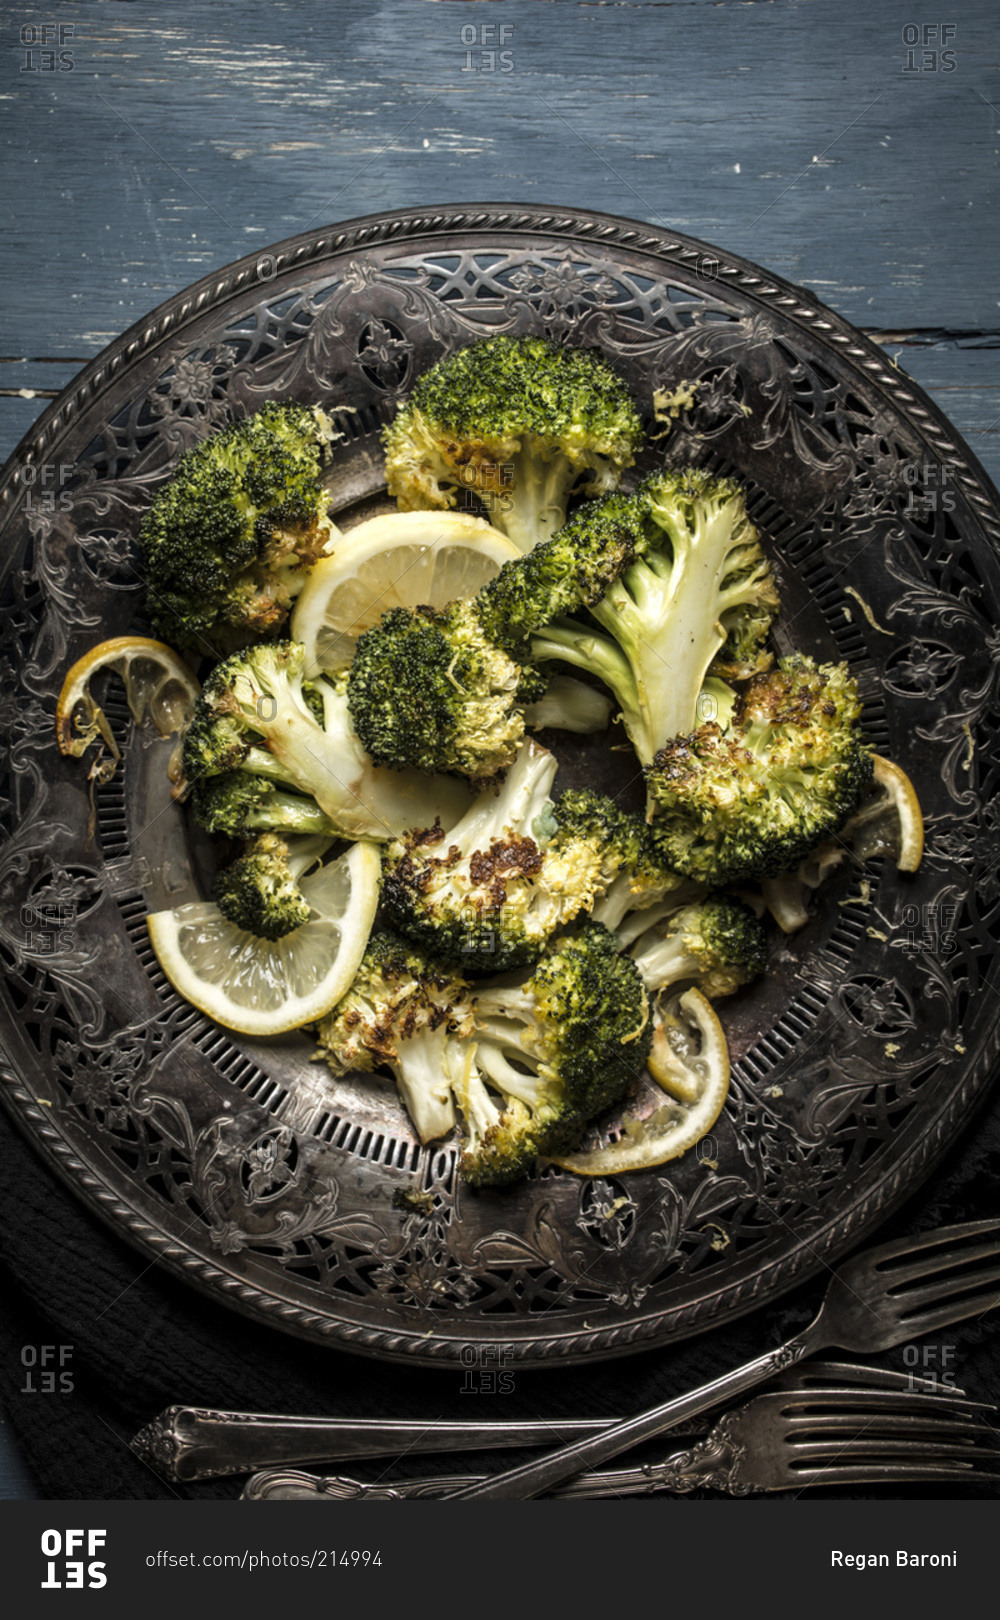 Roasted broccoli served on an antique plate